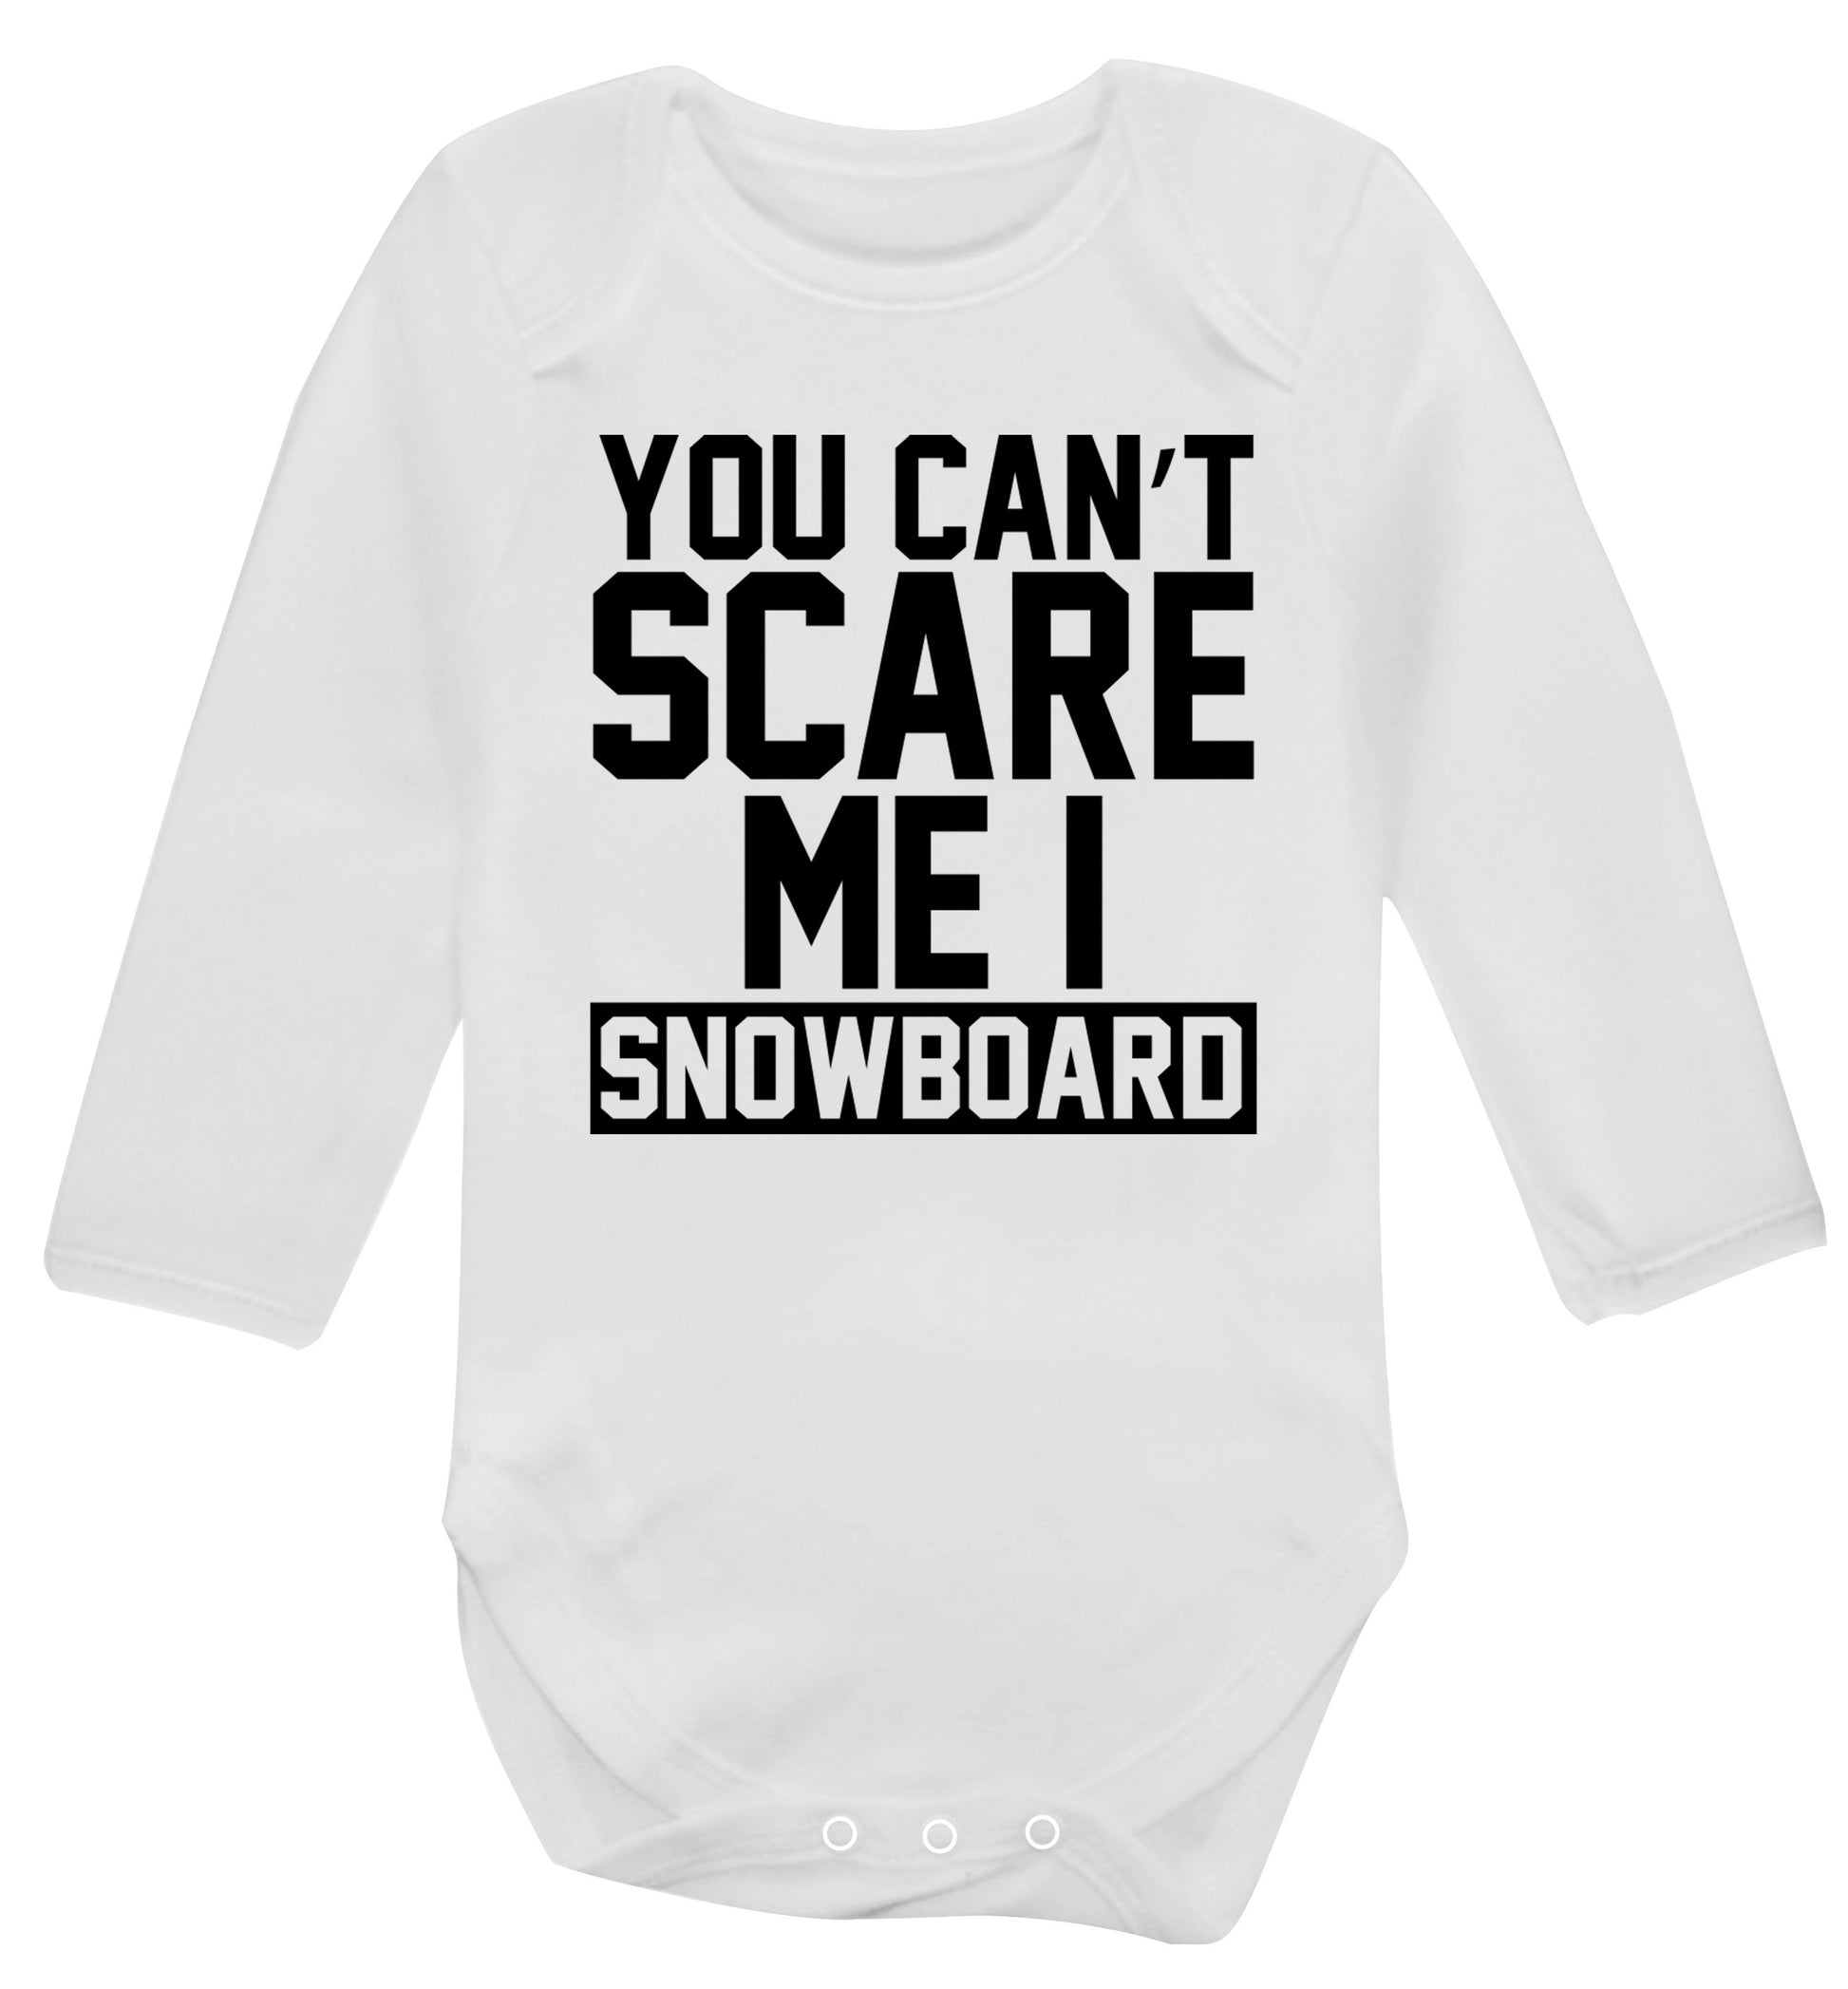 You can't scare me I snowboard Baby Vest long sleeved white 6-12 months